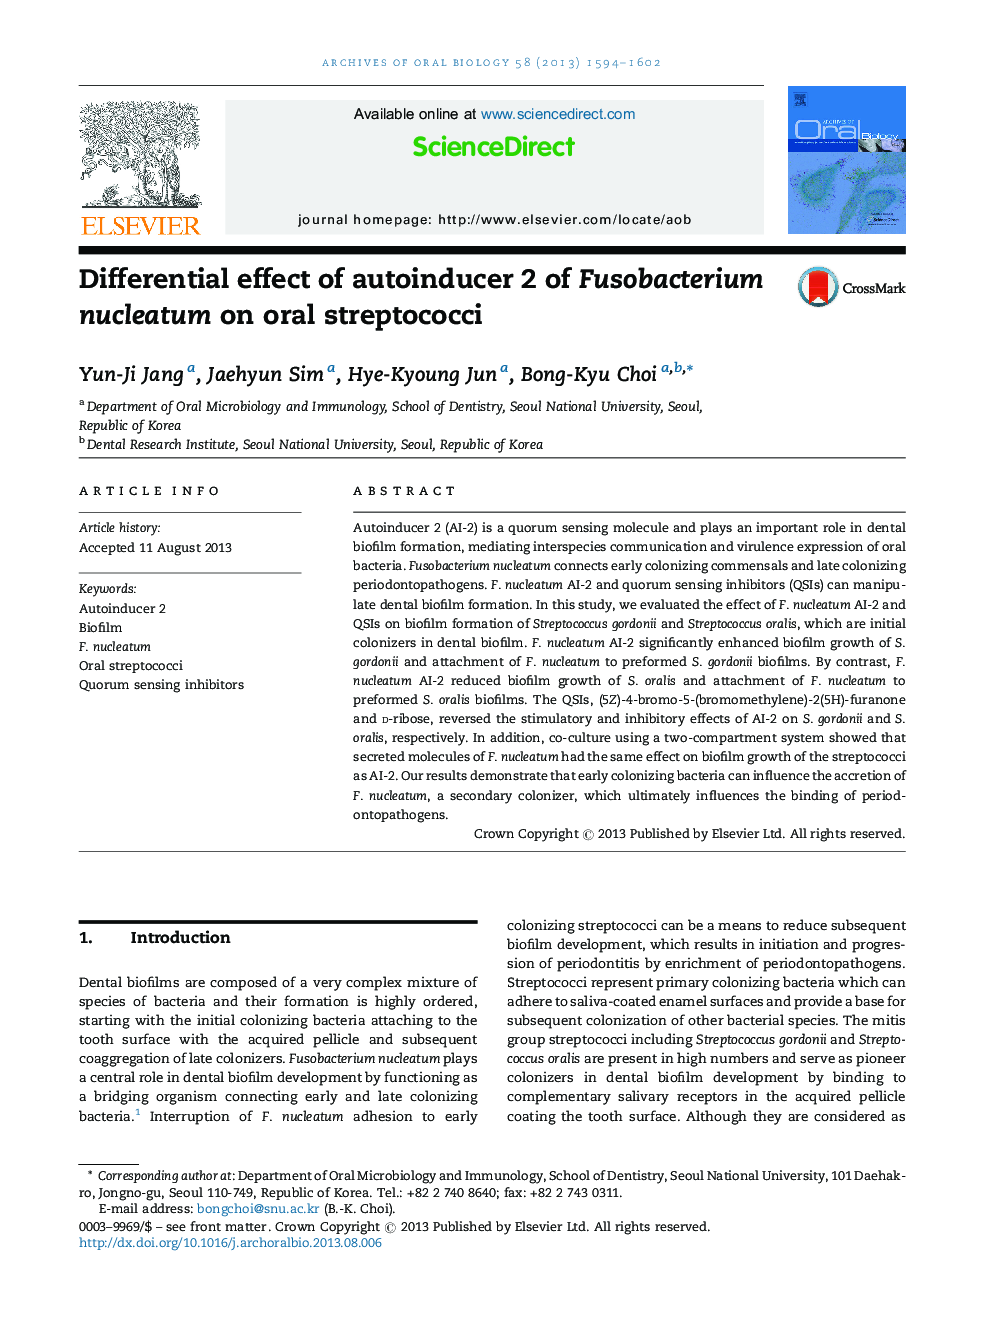 Differential effect of autoinducer 2 of Fusobacterium nucleatum on oral streptococci